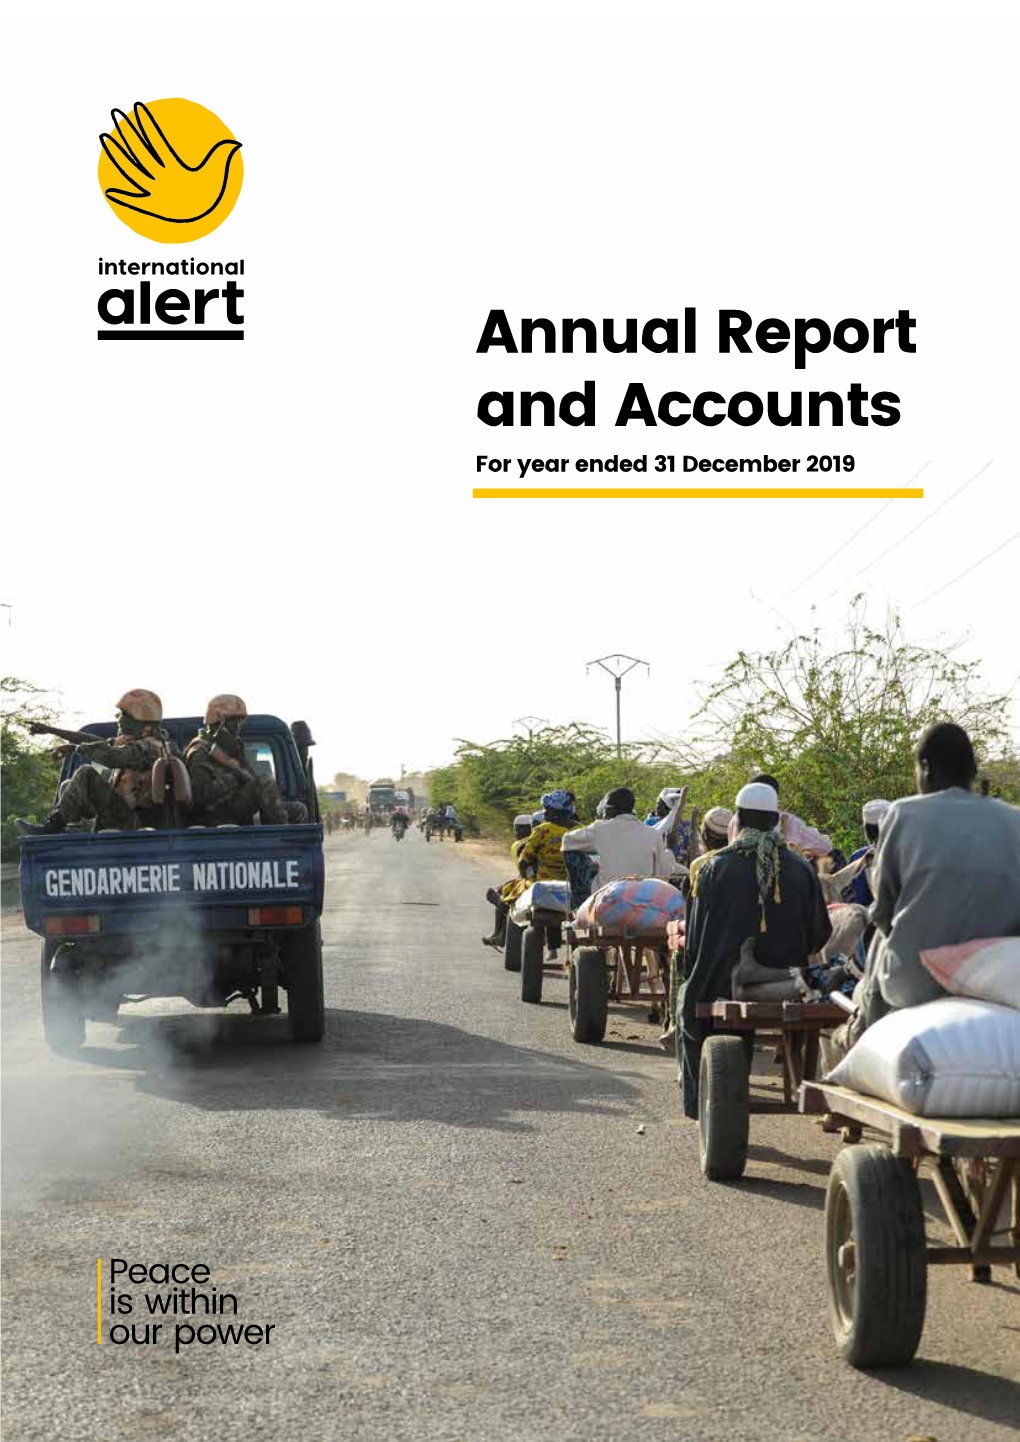 Annual Report and Accounts for Year Ended 31 December 2019 About International Alert